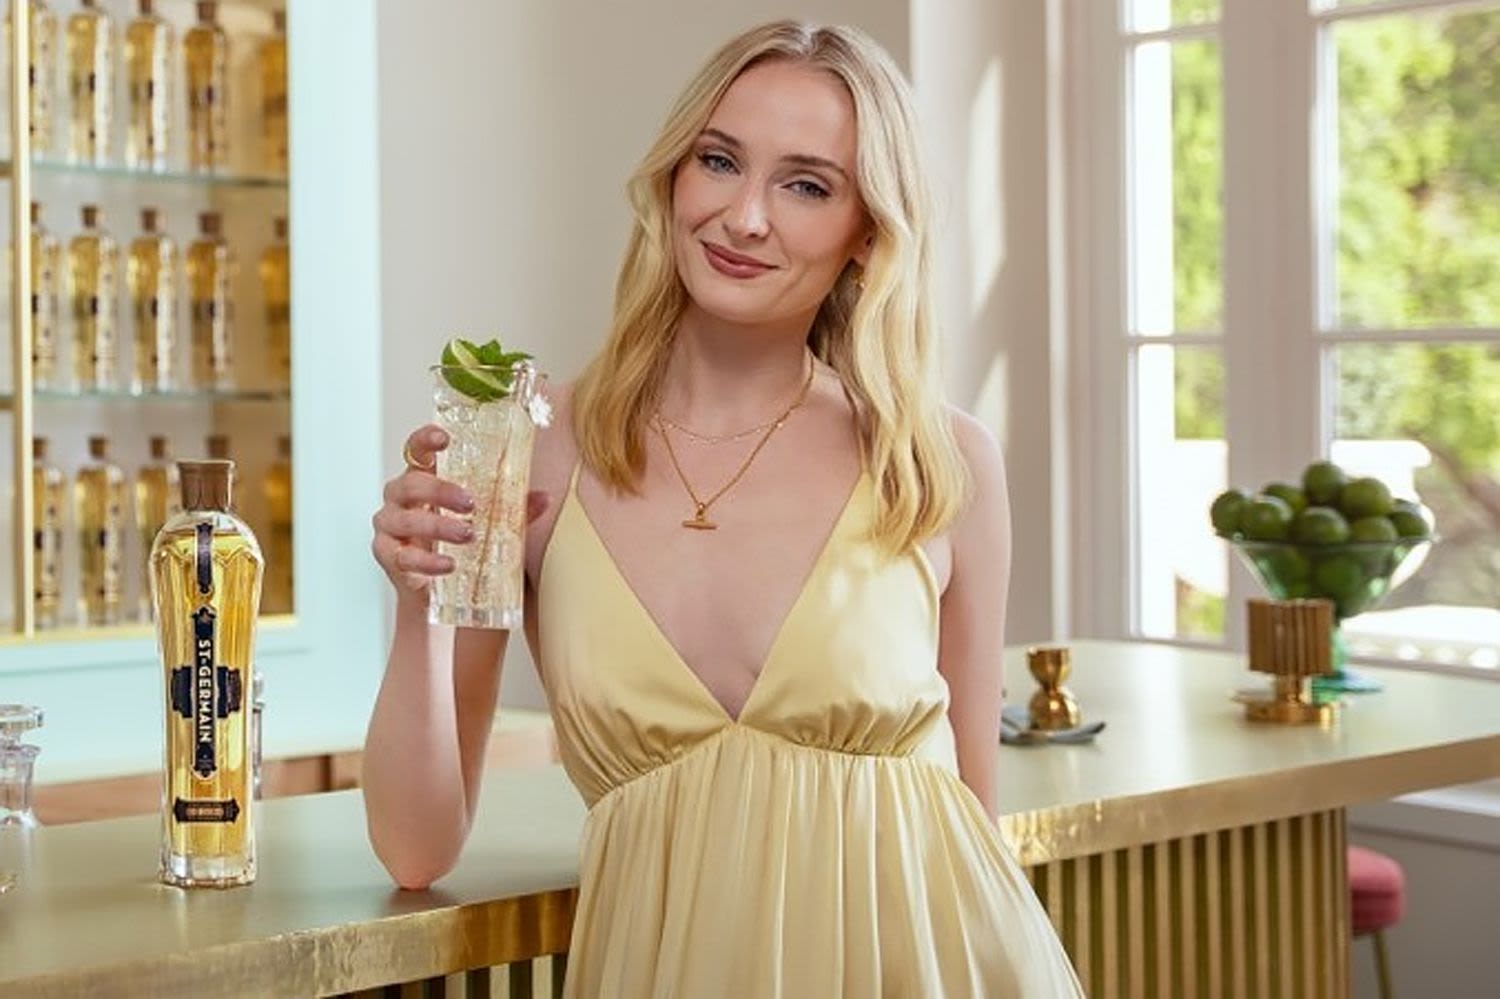 Sophie Turner Is 'Looking for Something Different, Fresh, Fun' in New St-Germain Campaign — Go Behind the Scenes